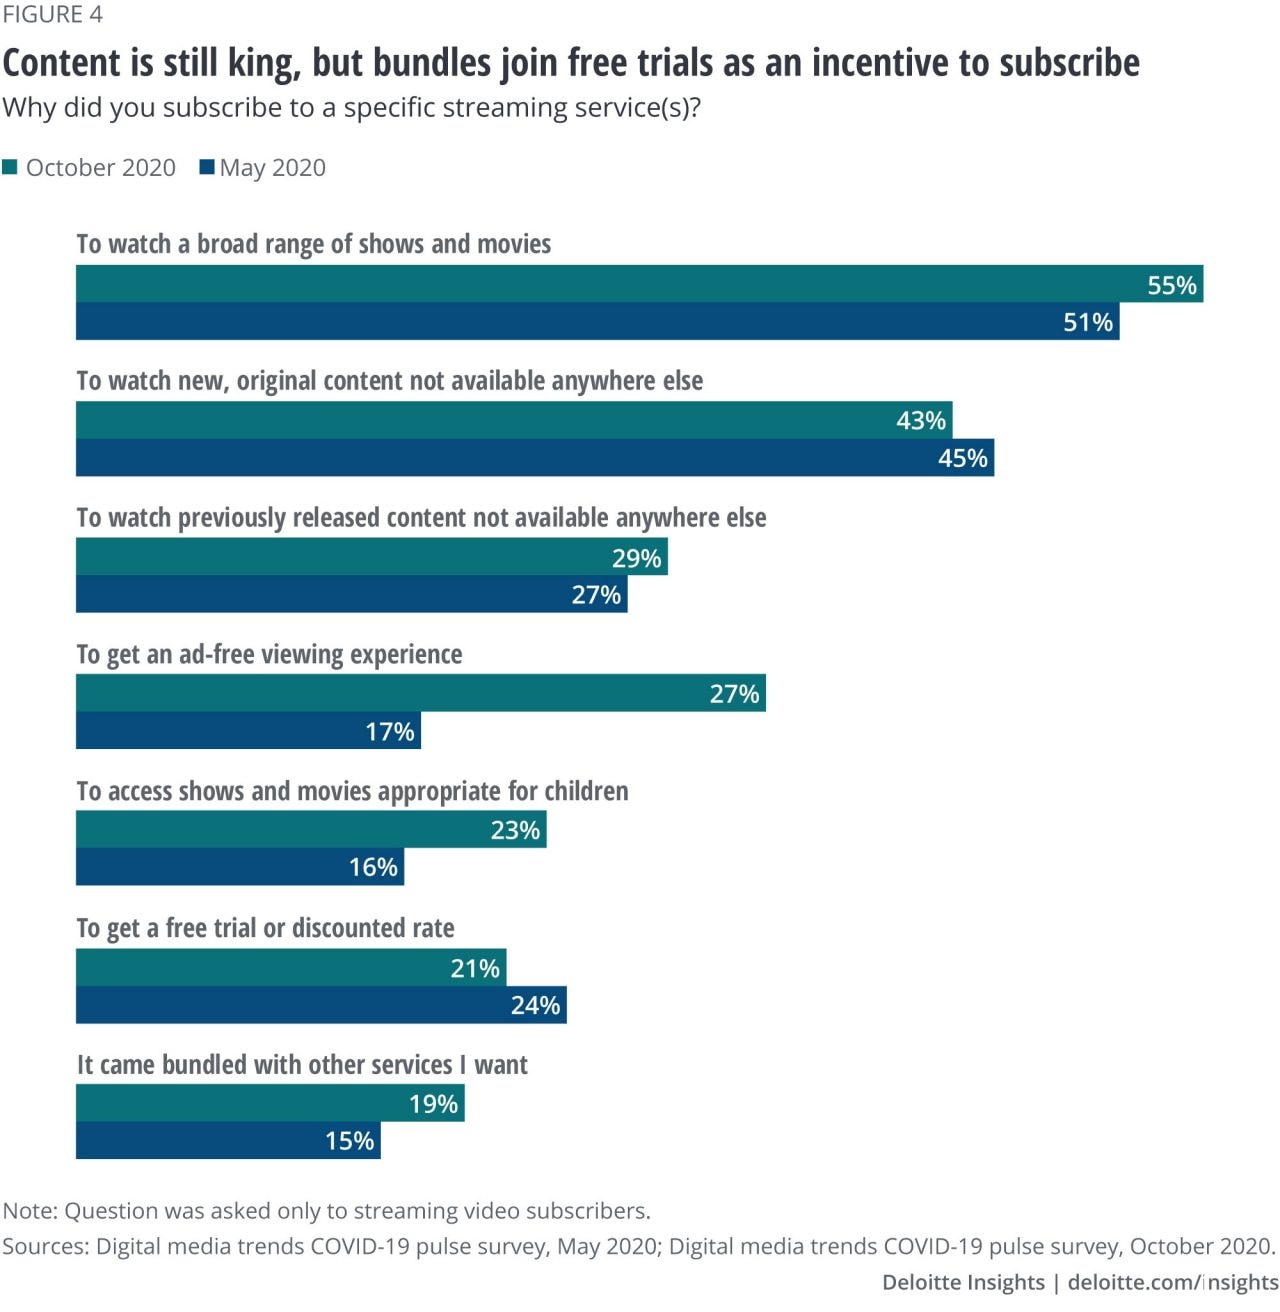 Figure 4. Content is still king, but bundles join free trials as an incentive to subscribe